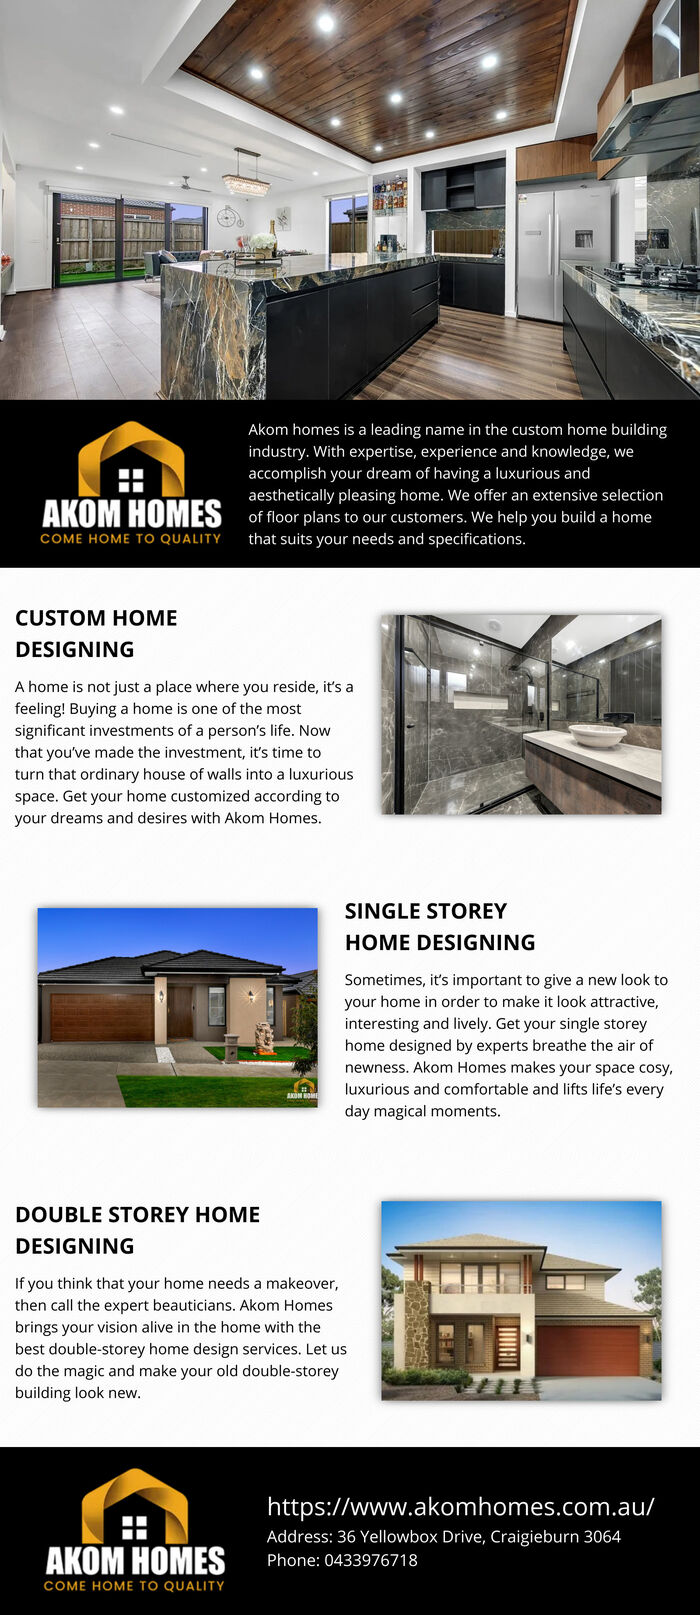 This infographic is designed by Akom Homes